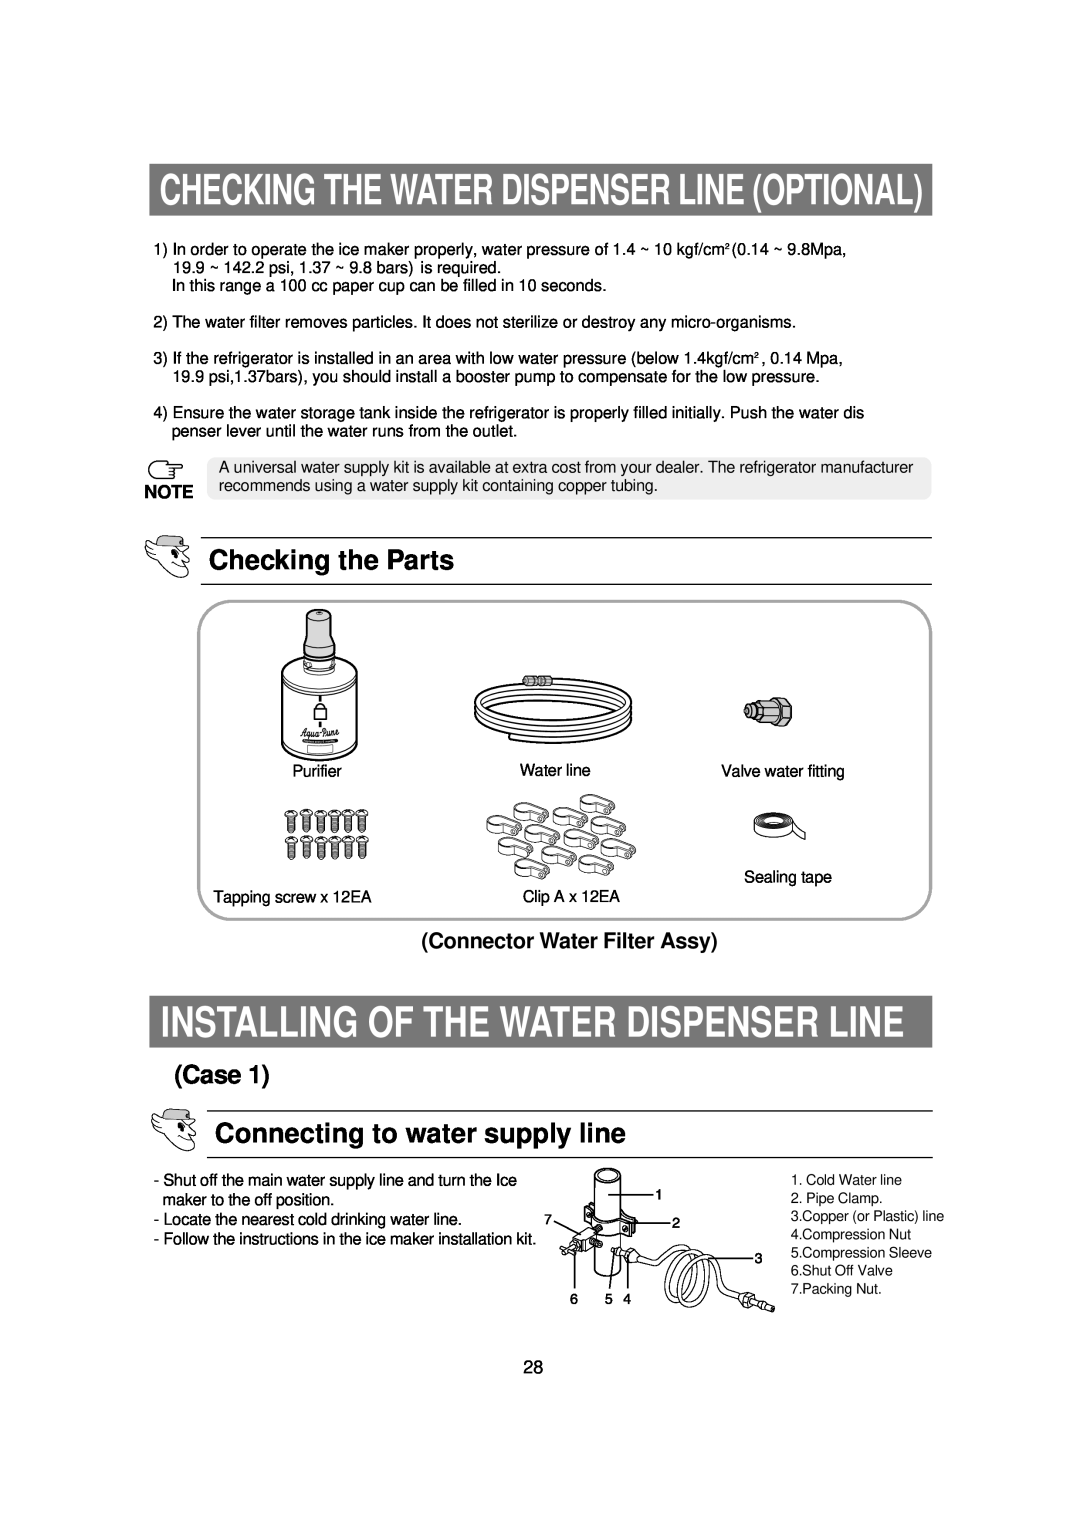 Samsung DA68-01453B Installing Of The Water Dispenser Line, Checking The Water Dispenser Line Optional, Checking the Parts 